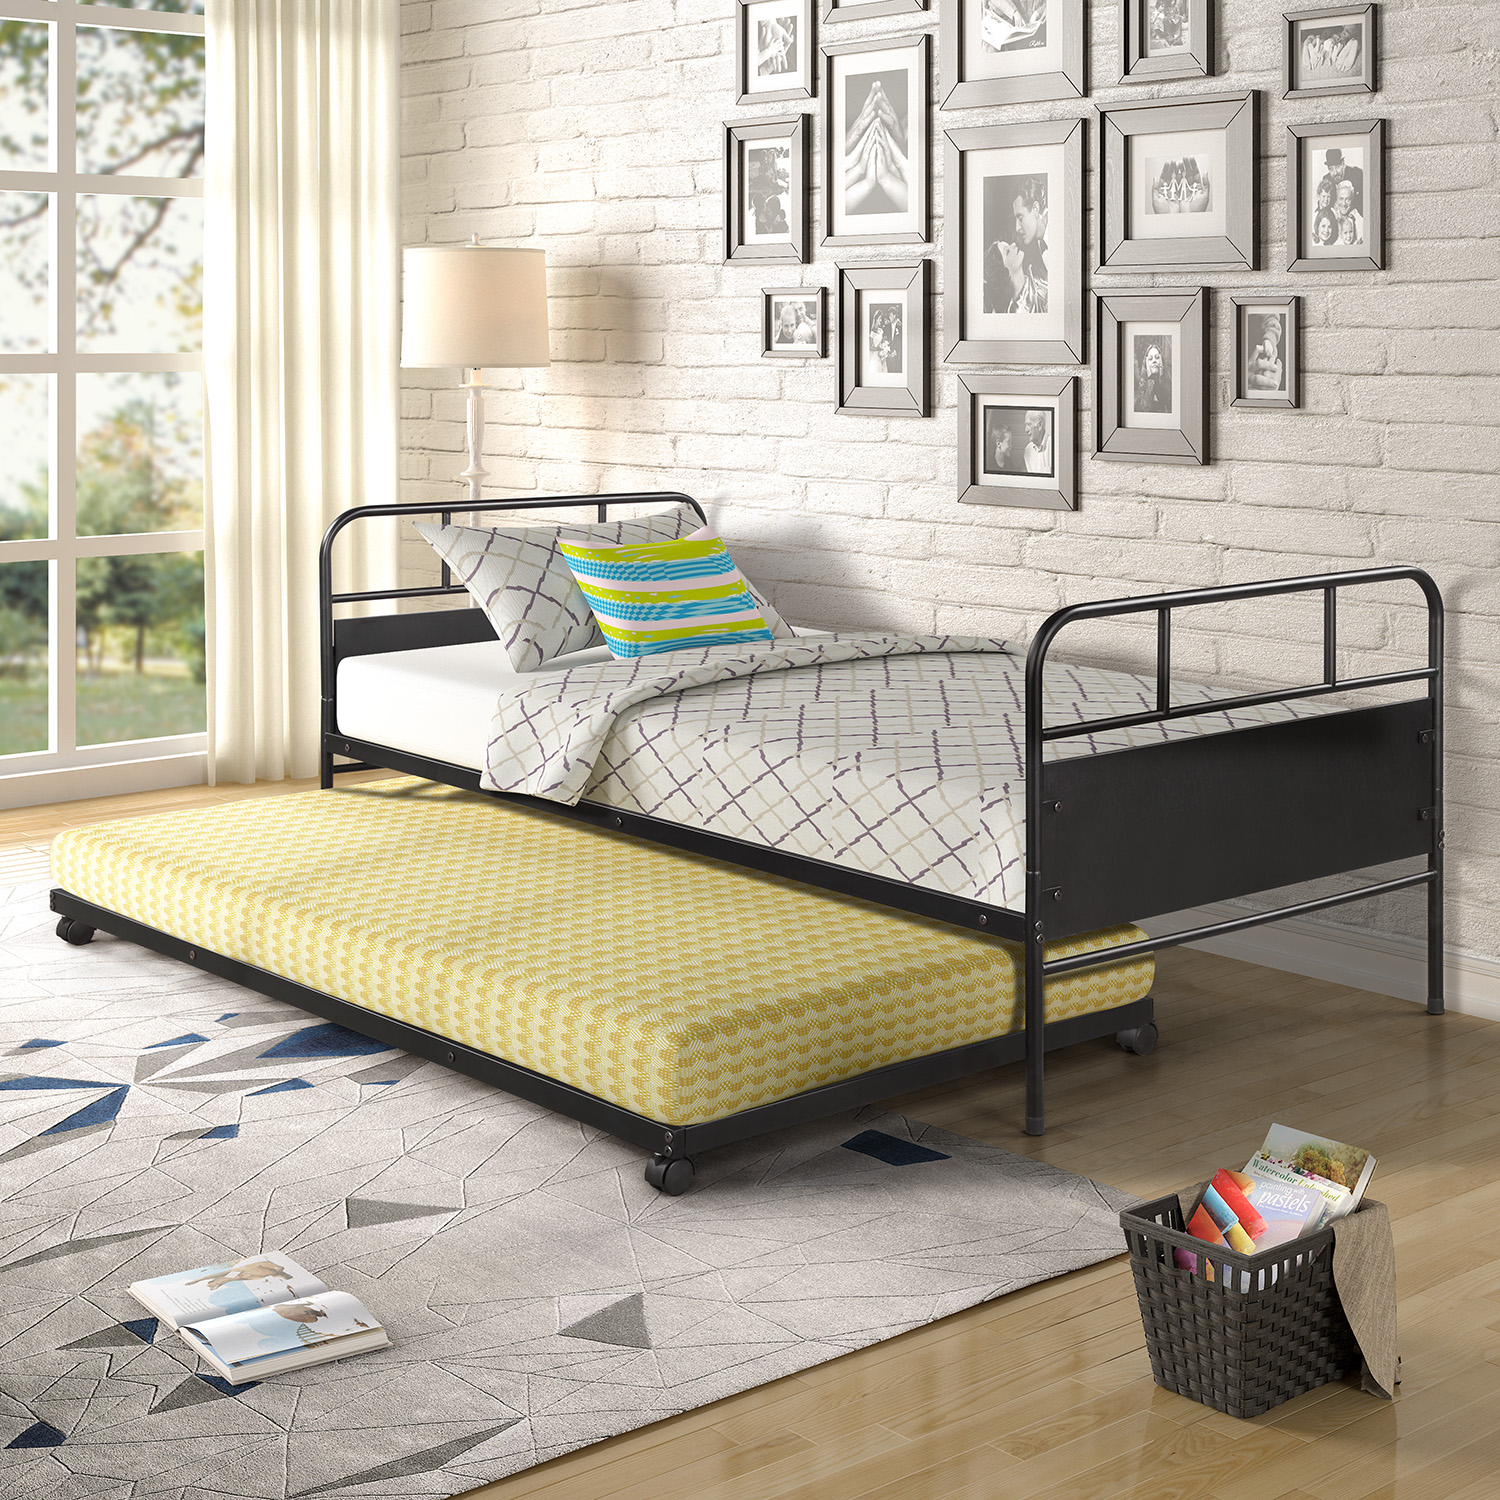 【Not allowed to sell to Walmart】Metal Daybed Platform Bed Frame with Trundle Built-in Casters, Twin Size-CASAINC